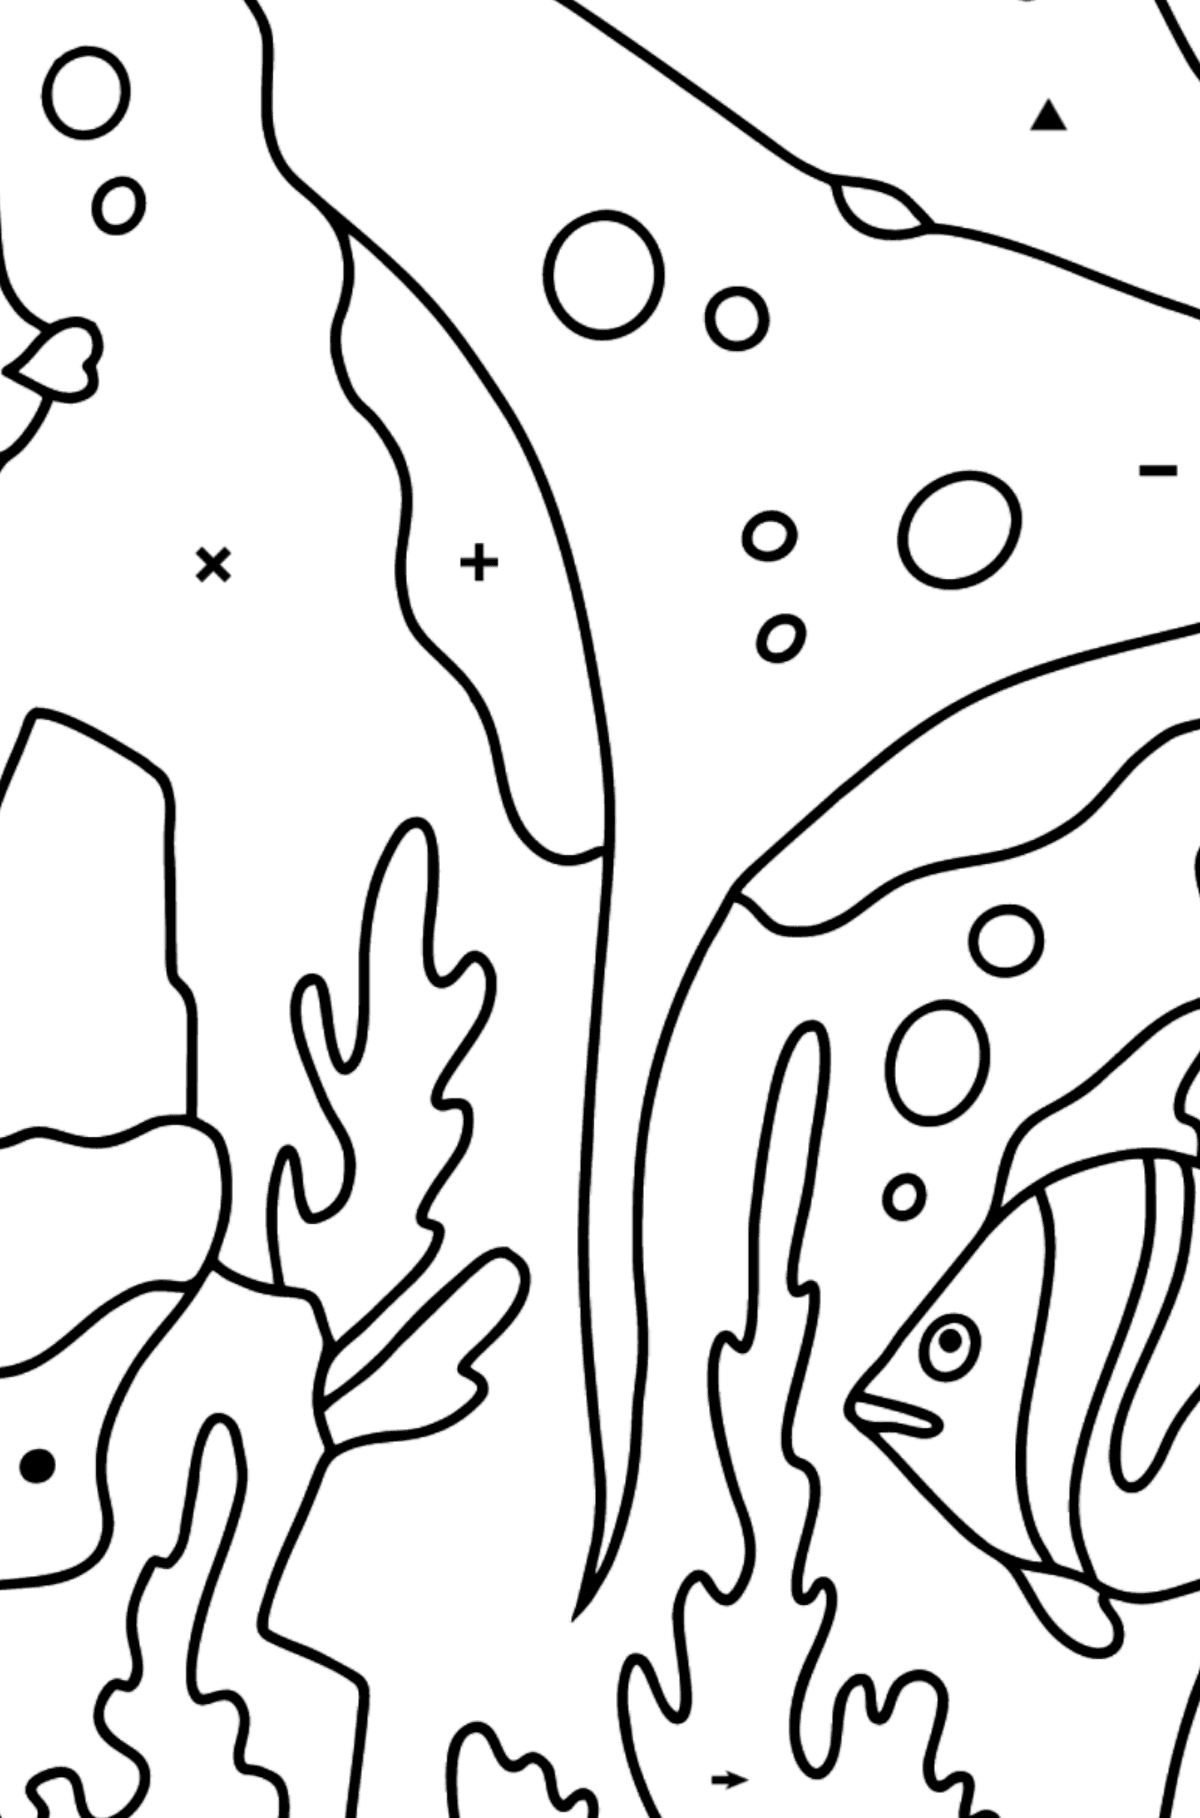 Coloring Page - Fish are Playing with a Charming Stingray - Coloring by Symbols for Kids